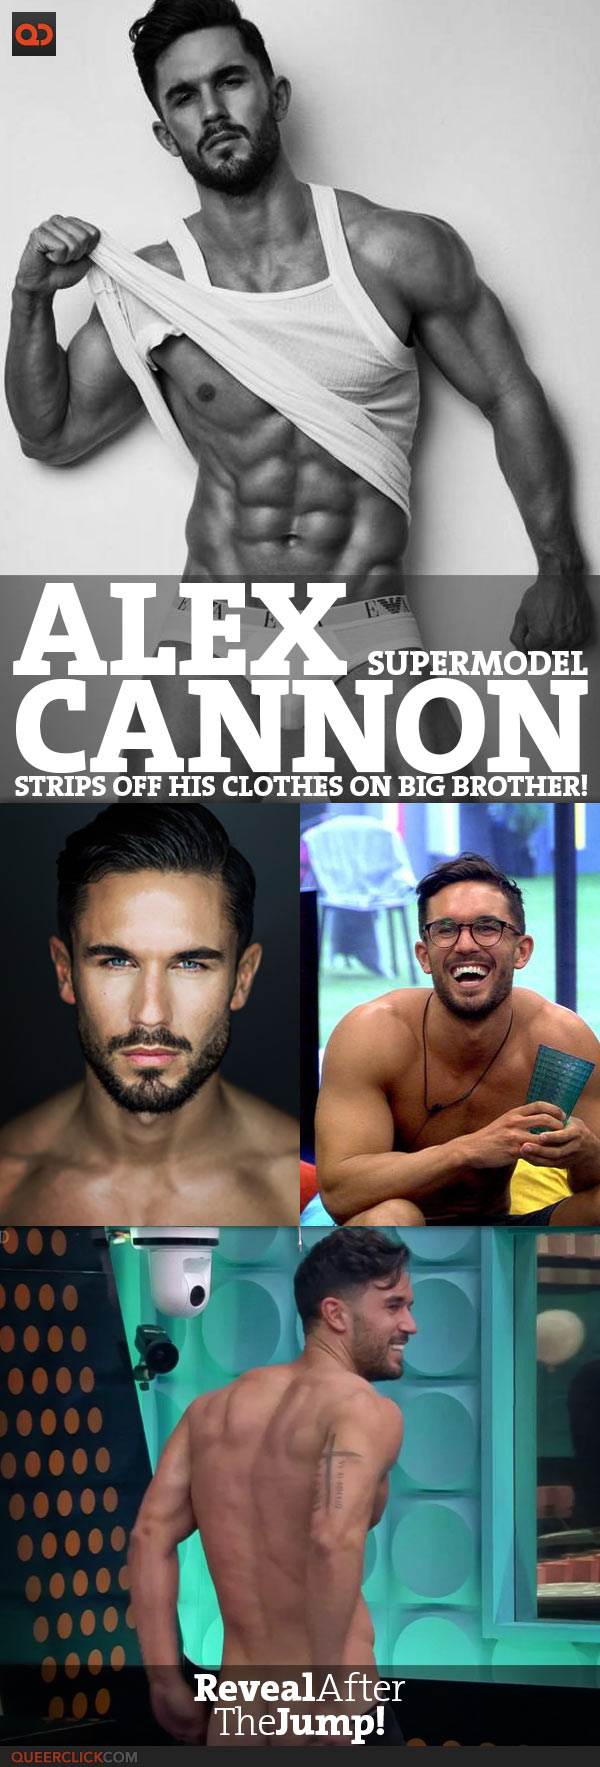 qc-supermodel_alex_cannon_strips_off_his_clothes_on_big_brother-teaser